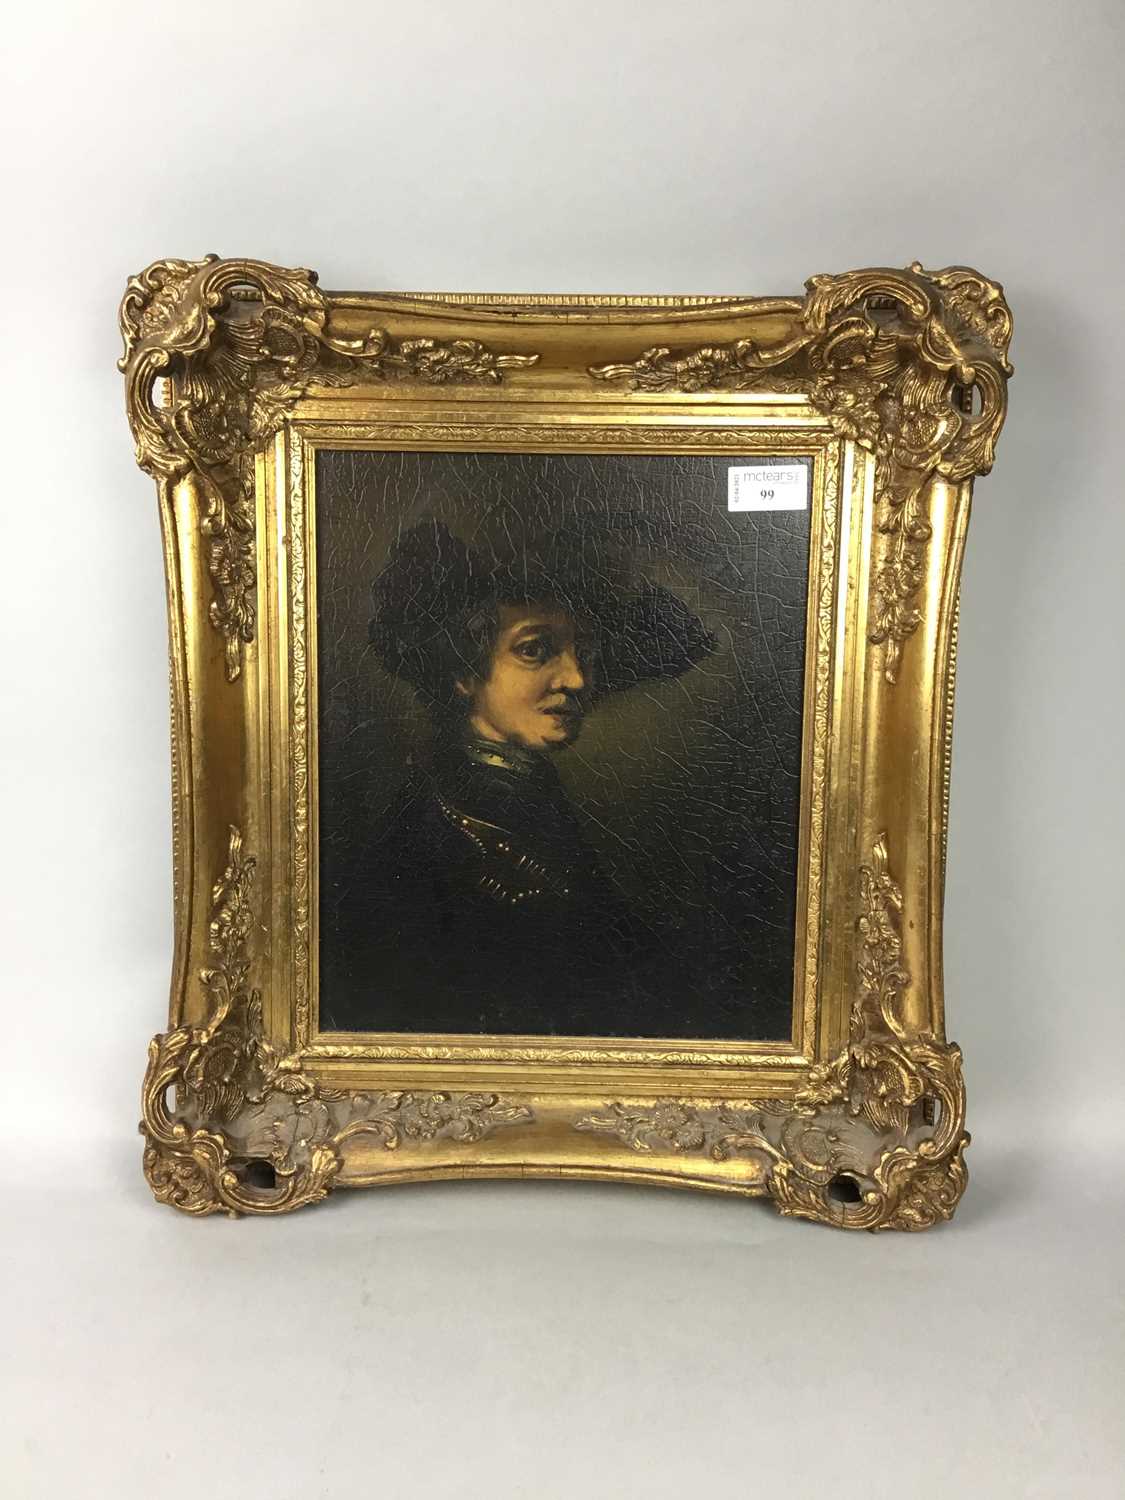 Lot 99 - A FRAMED PRINT IN THE STYLE OF THE OLD MASTERS